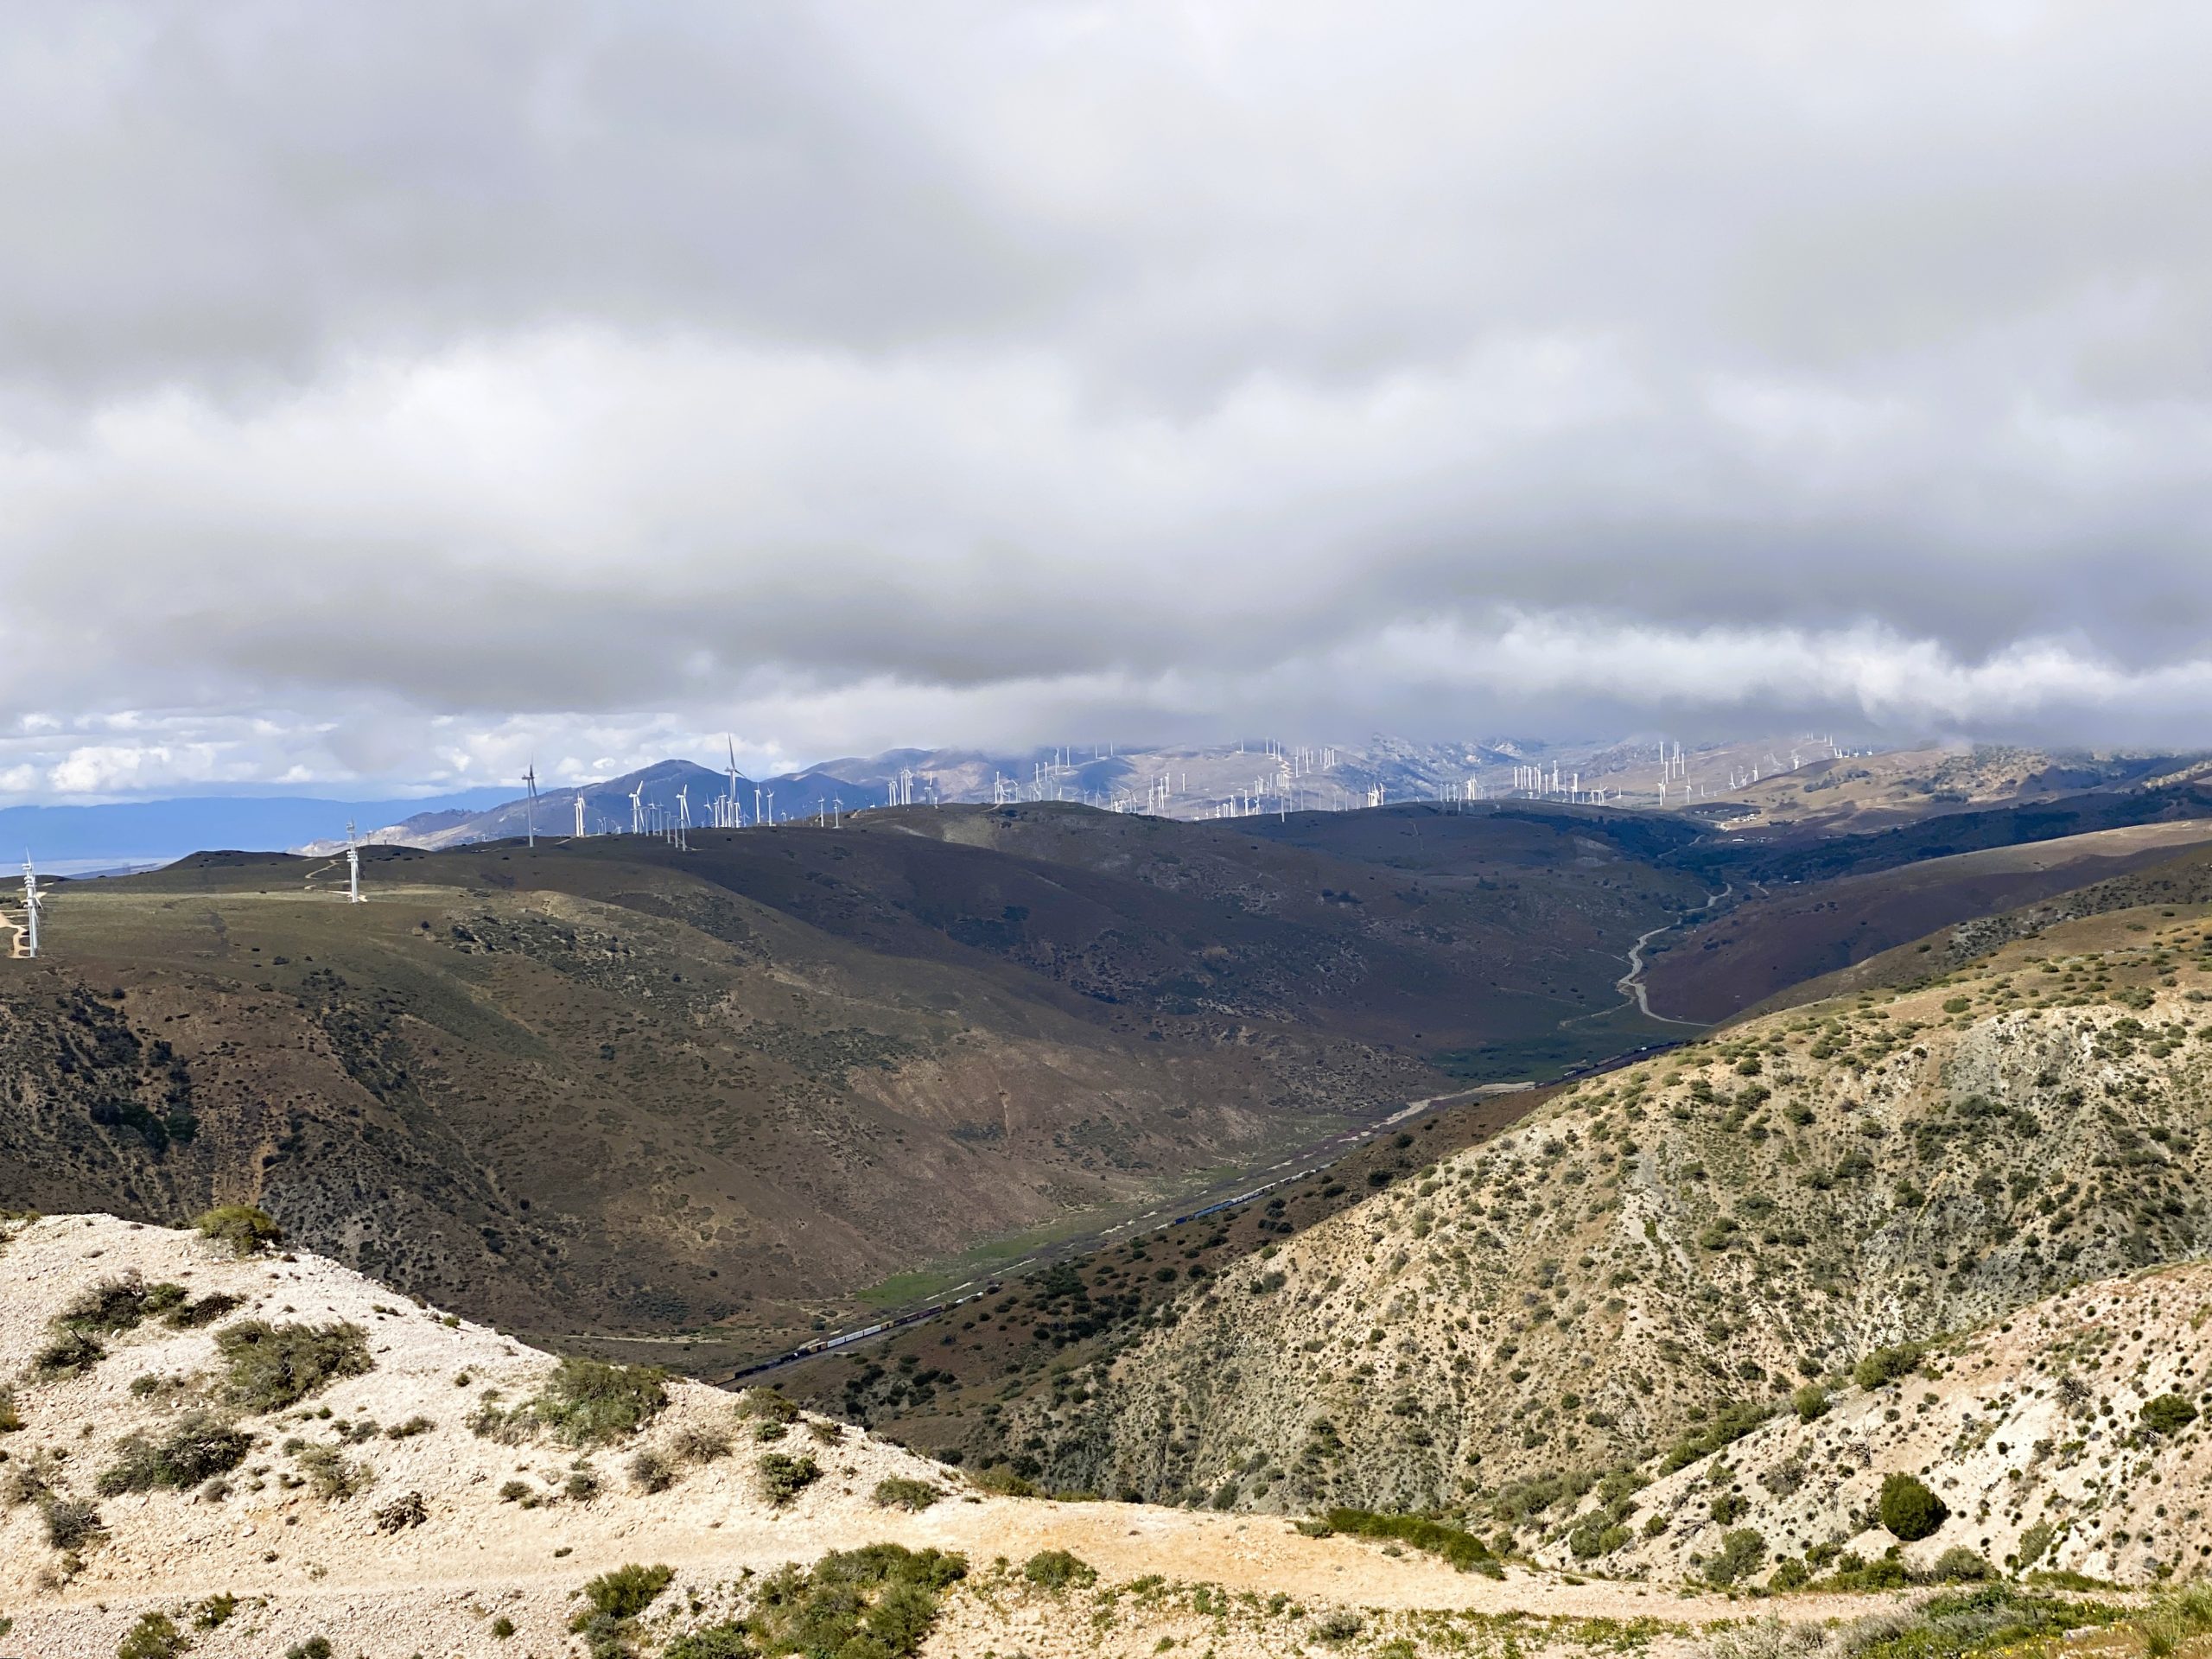  PCT Trail Journal: Day 23 Mile 597.3 to 578.1 windmills